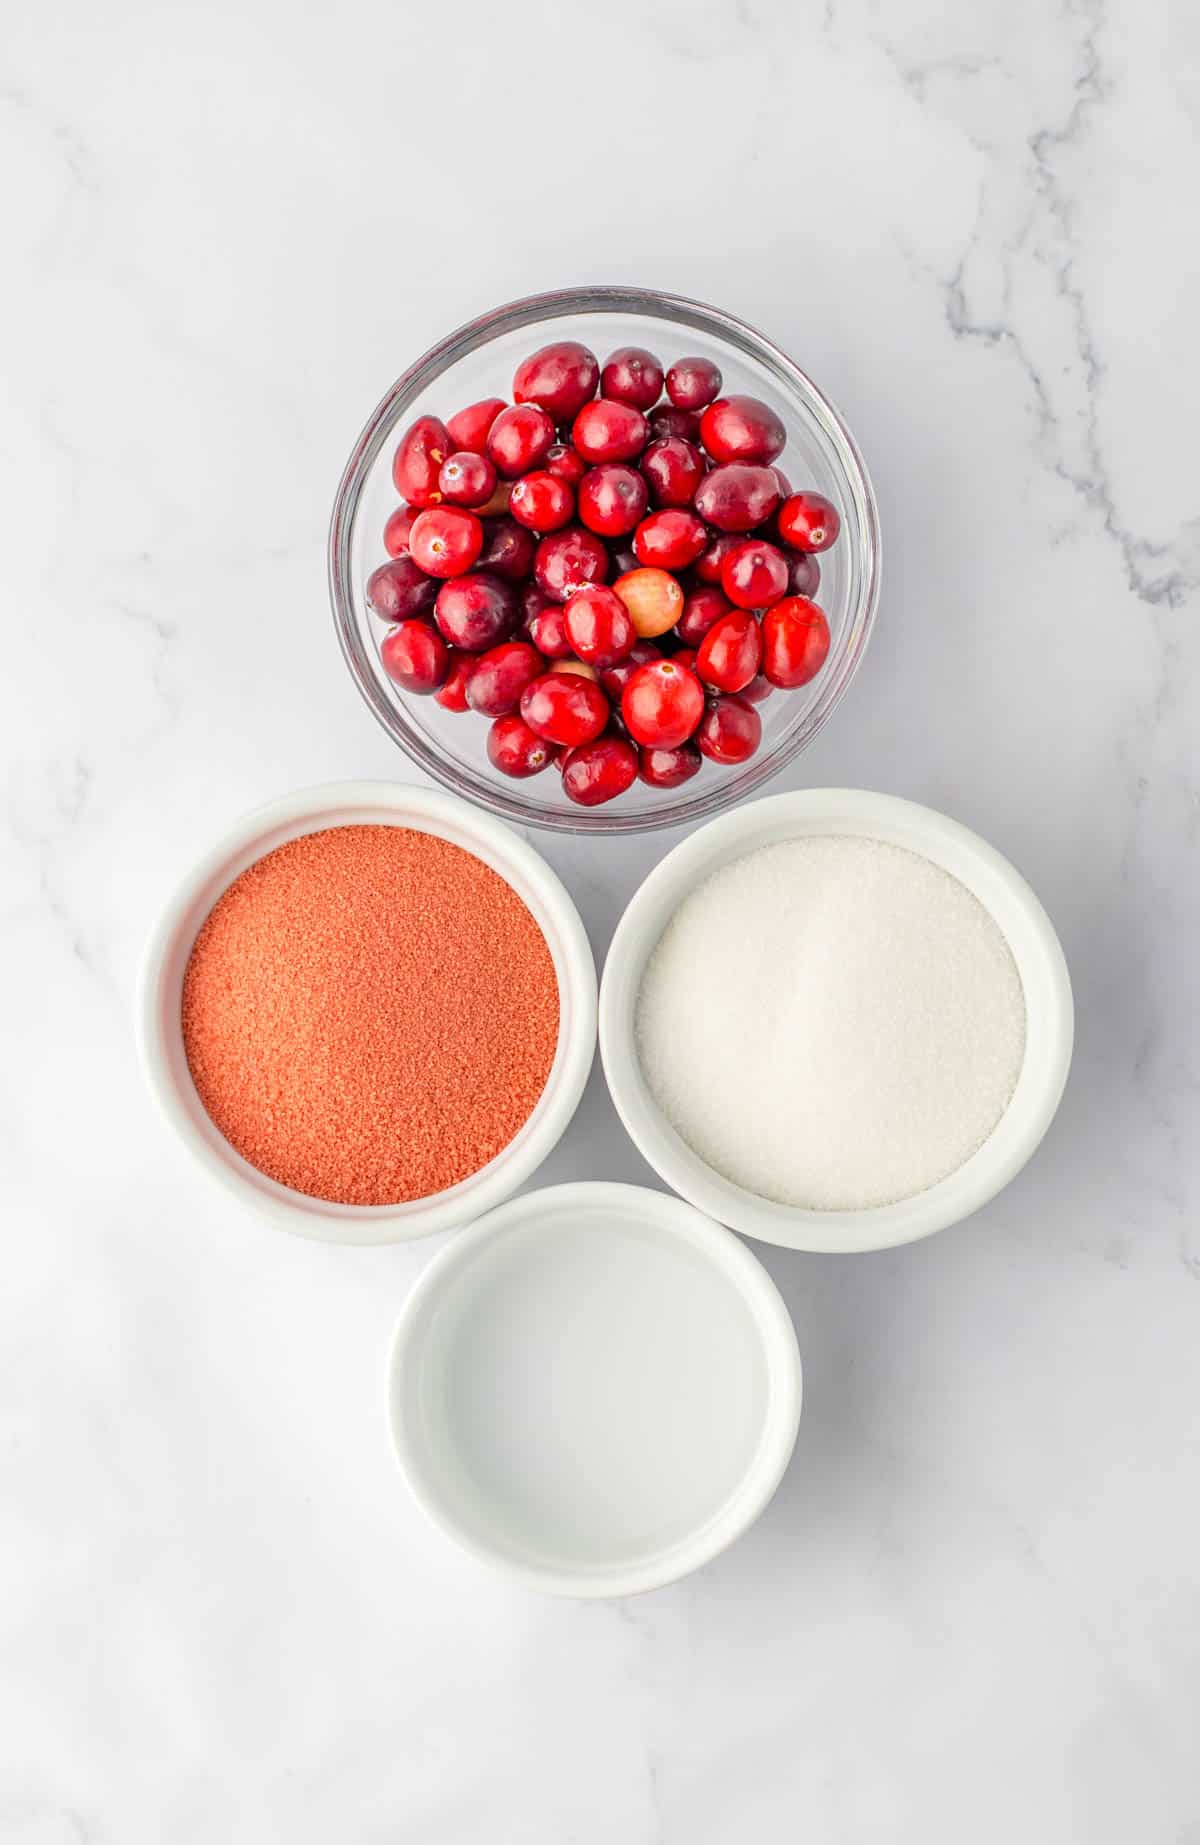 Ingredients to make Cranberry Jello Shots with vodka on a table in white bowls.